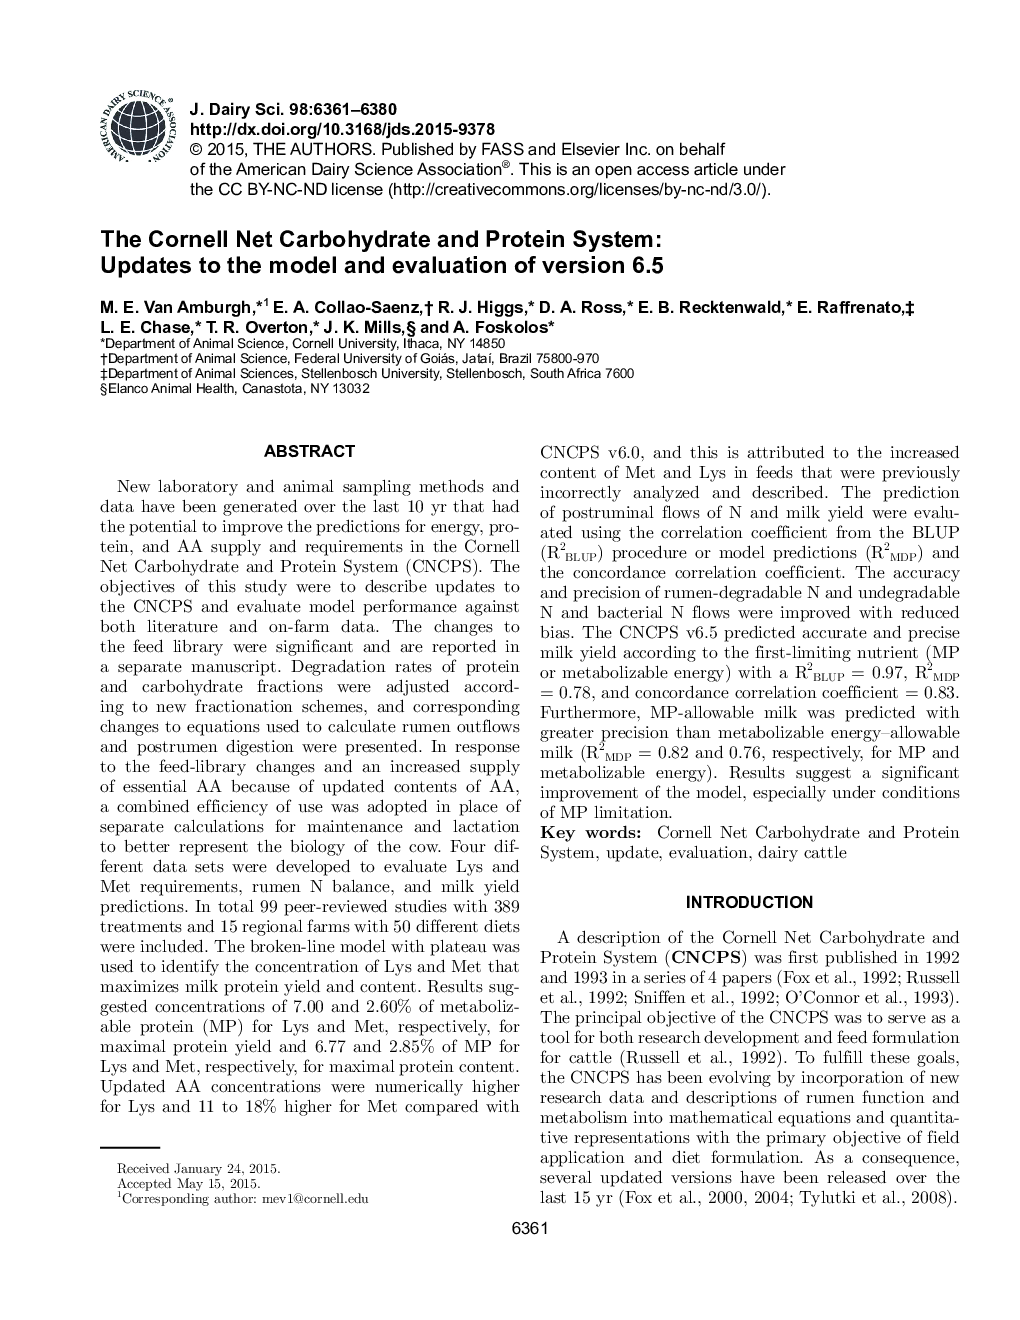 The Cornell Net Carbohydrate and Protein System: Updates to the model and evaluation of version 6.5